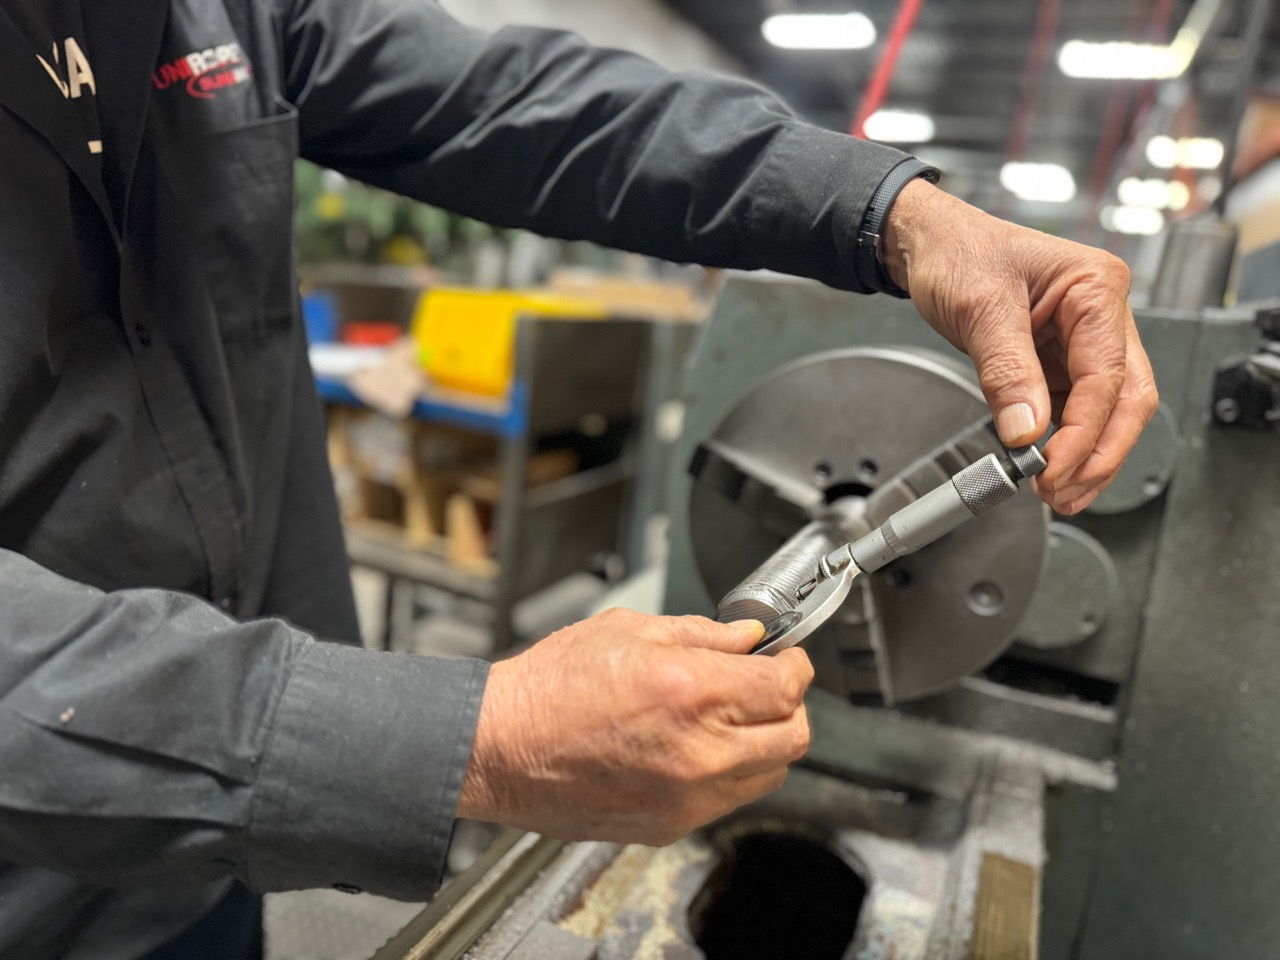 A Unirope technician verifies the thread dimension on a custom manufactured threaded stud that will be used to make a custom wire rope assembly.